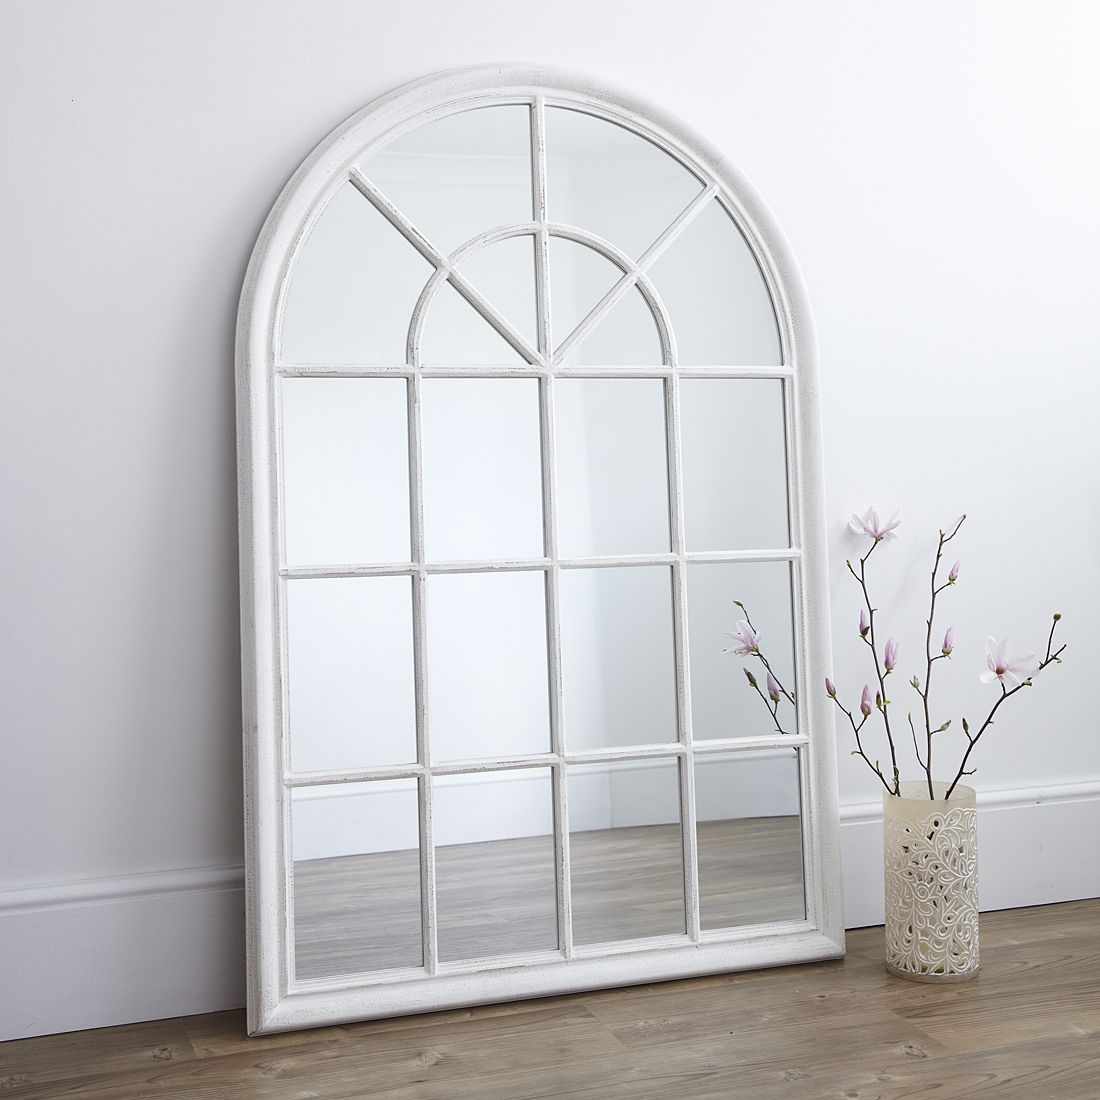 Most Popular White Arched Window Wall Mirror Pertaining To Arched Wall Mirrors (View 5 of 20)